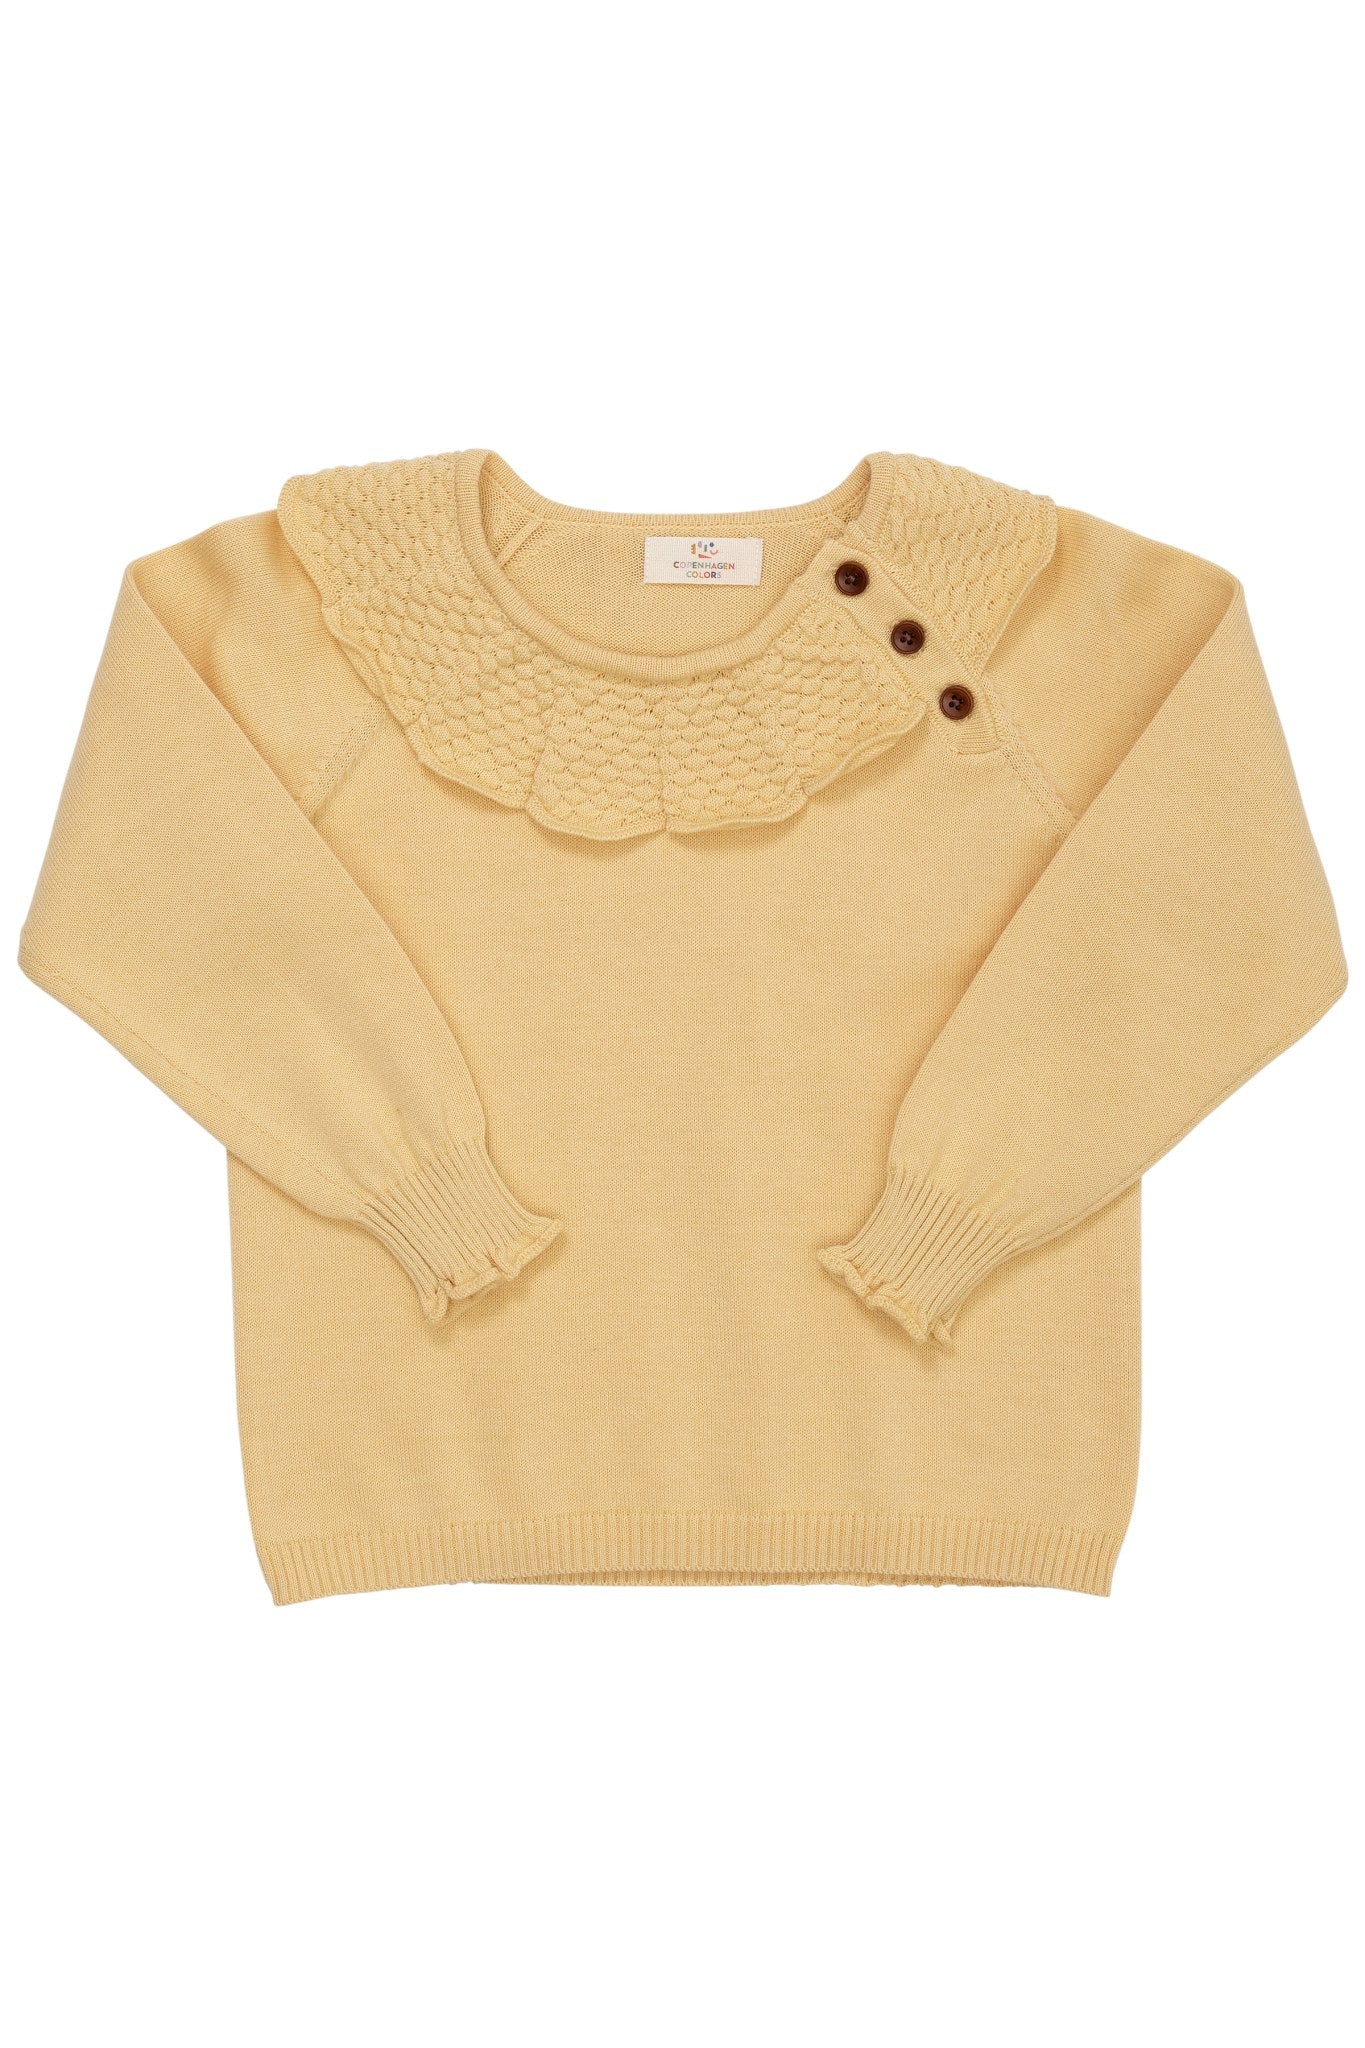 LT. KNITTED MARGUERITTE BLOUSE - PALE YELLOW